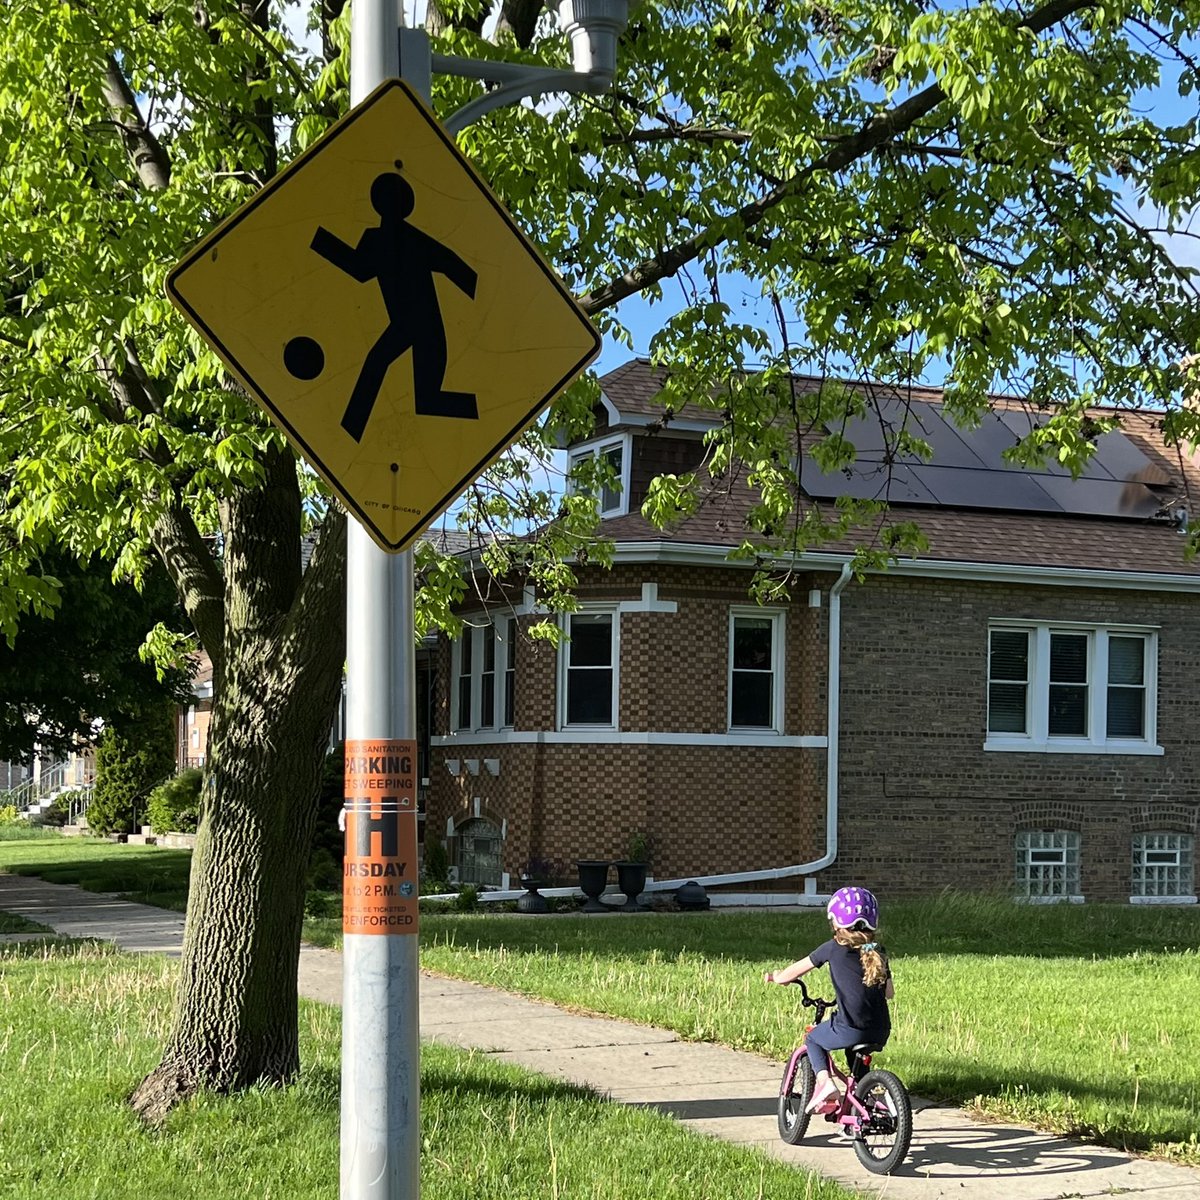 Tomorrow (May 8) is Bike to School Day! Going to and from school is one of our most frequent trips (10x/week) and *nobody* likes the drop-off line. What would make it easier for YOU to ditch the car and ride/walk to school?